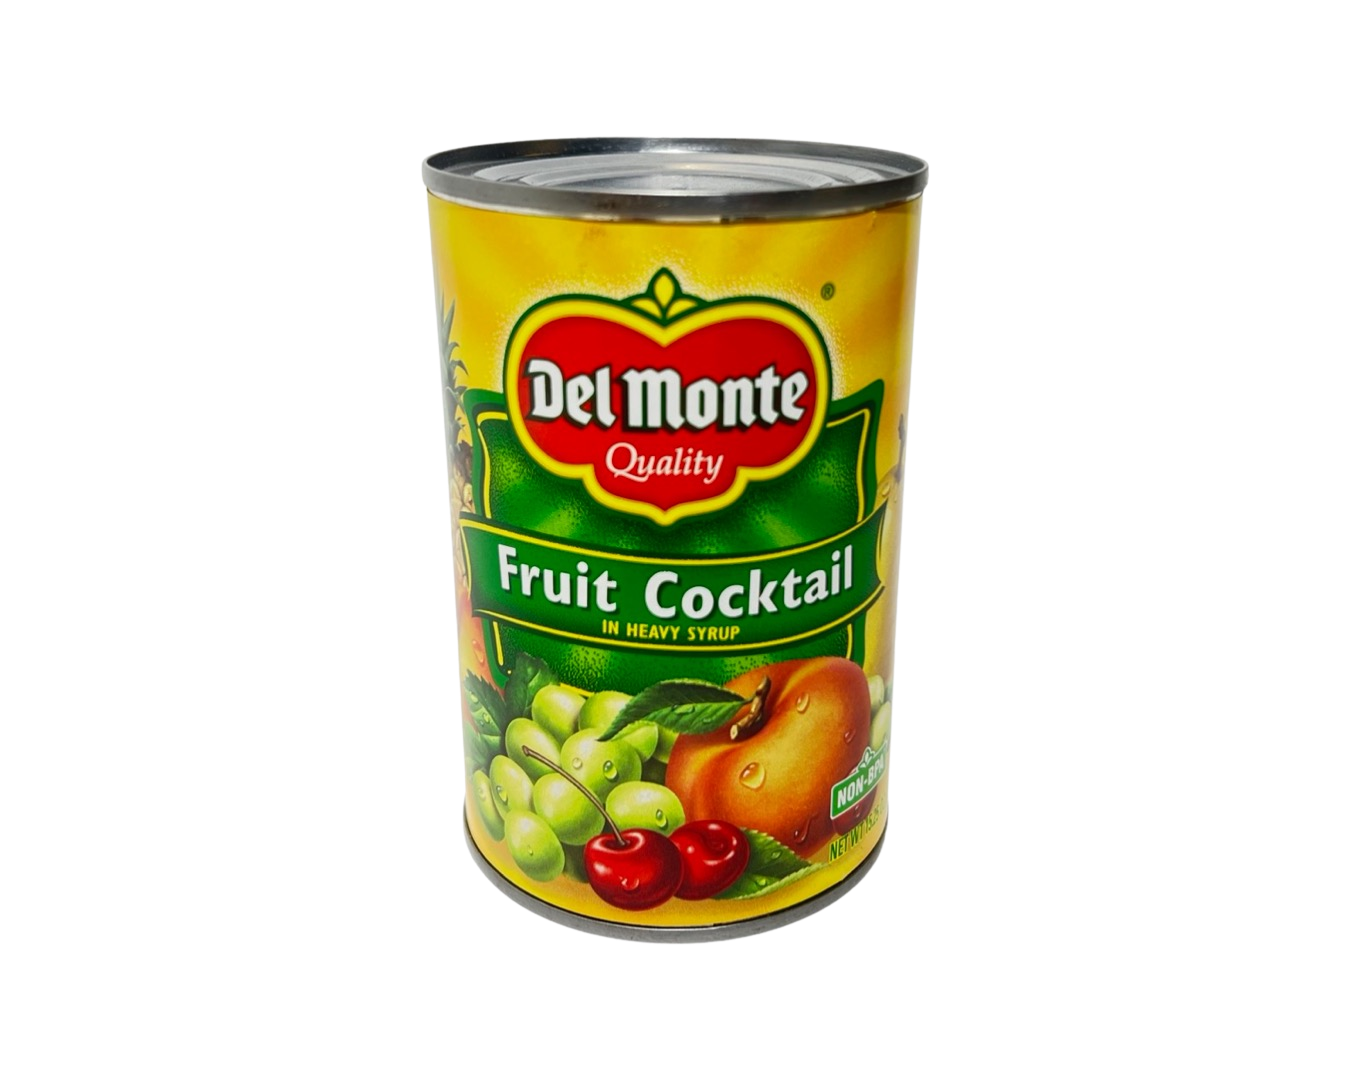 Del Monte Fruit Cocktail In Heavy Syrup 432g